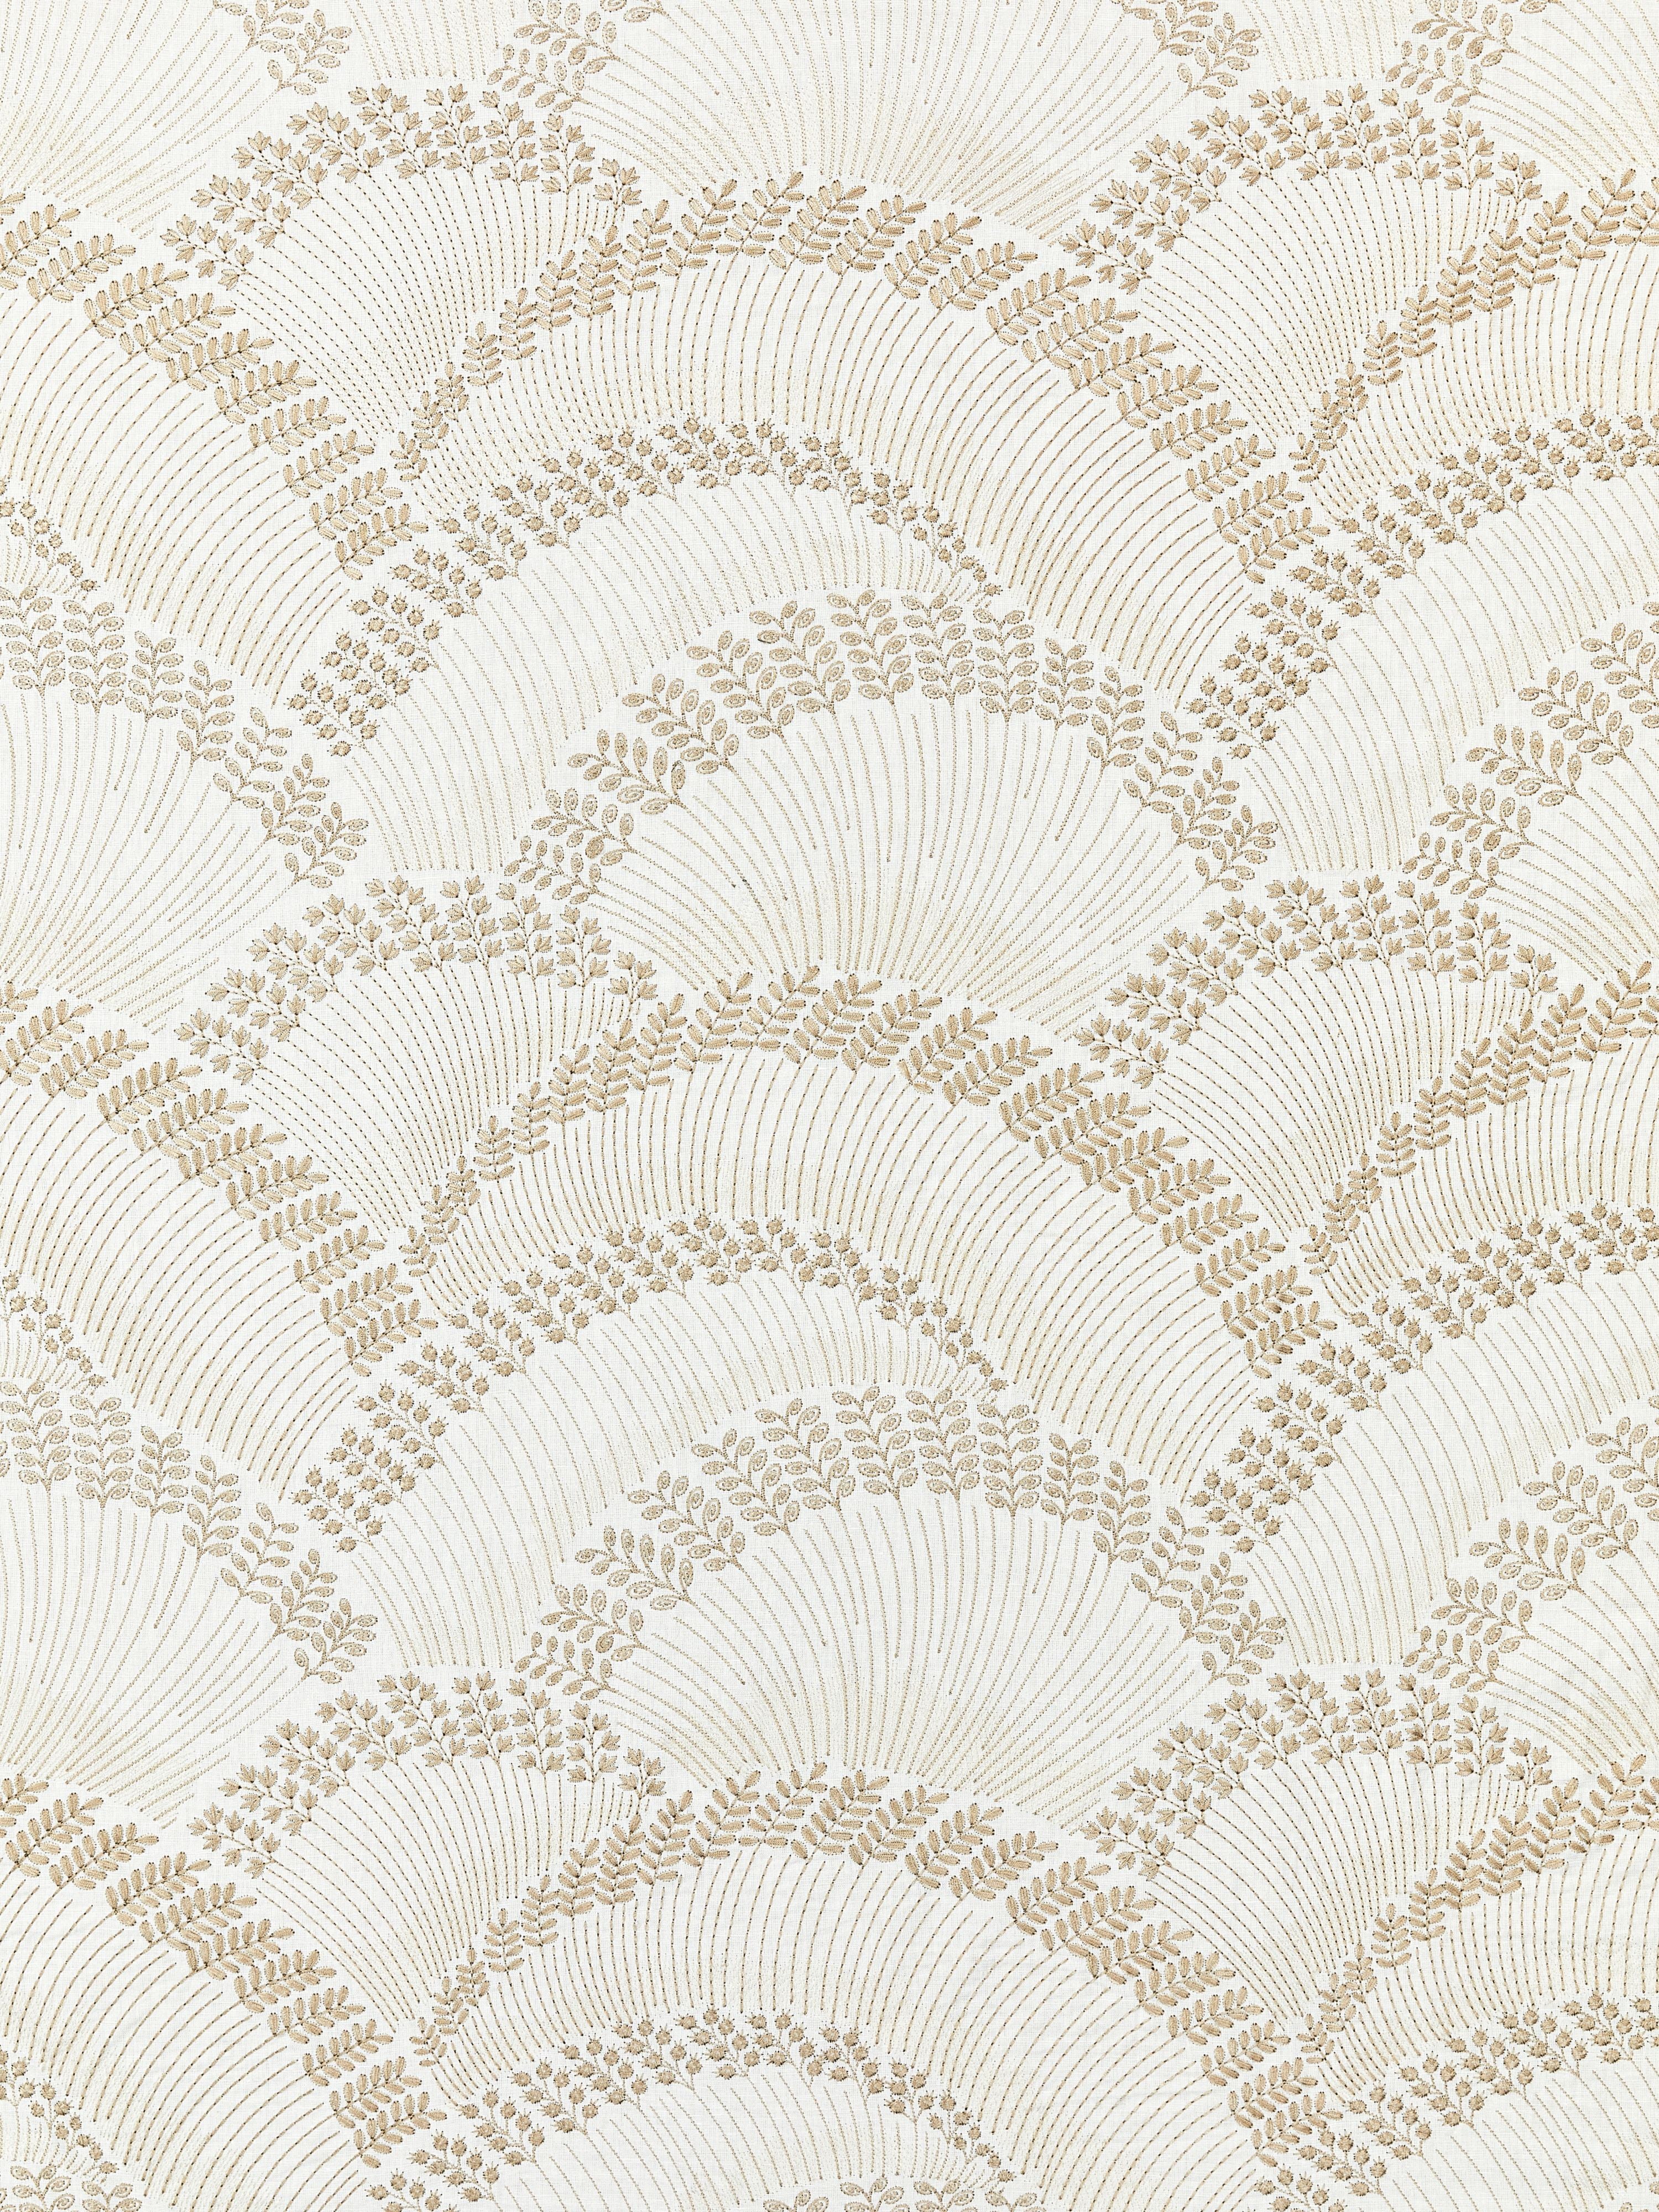 Lovegrass Embroidery fabric in latte color - pattern number SC 000127256 - by Scalamandre in the Scalamandre Fabrics Book 1 collection